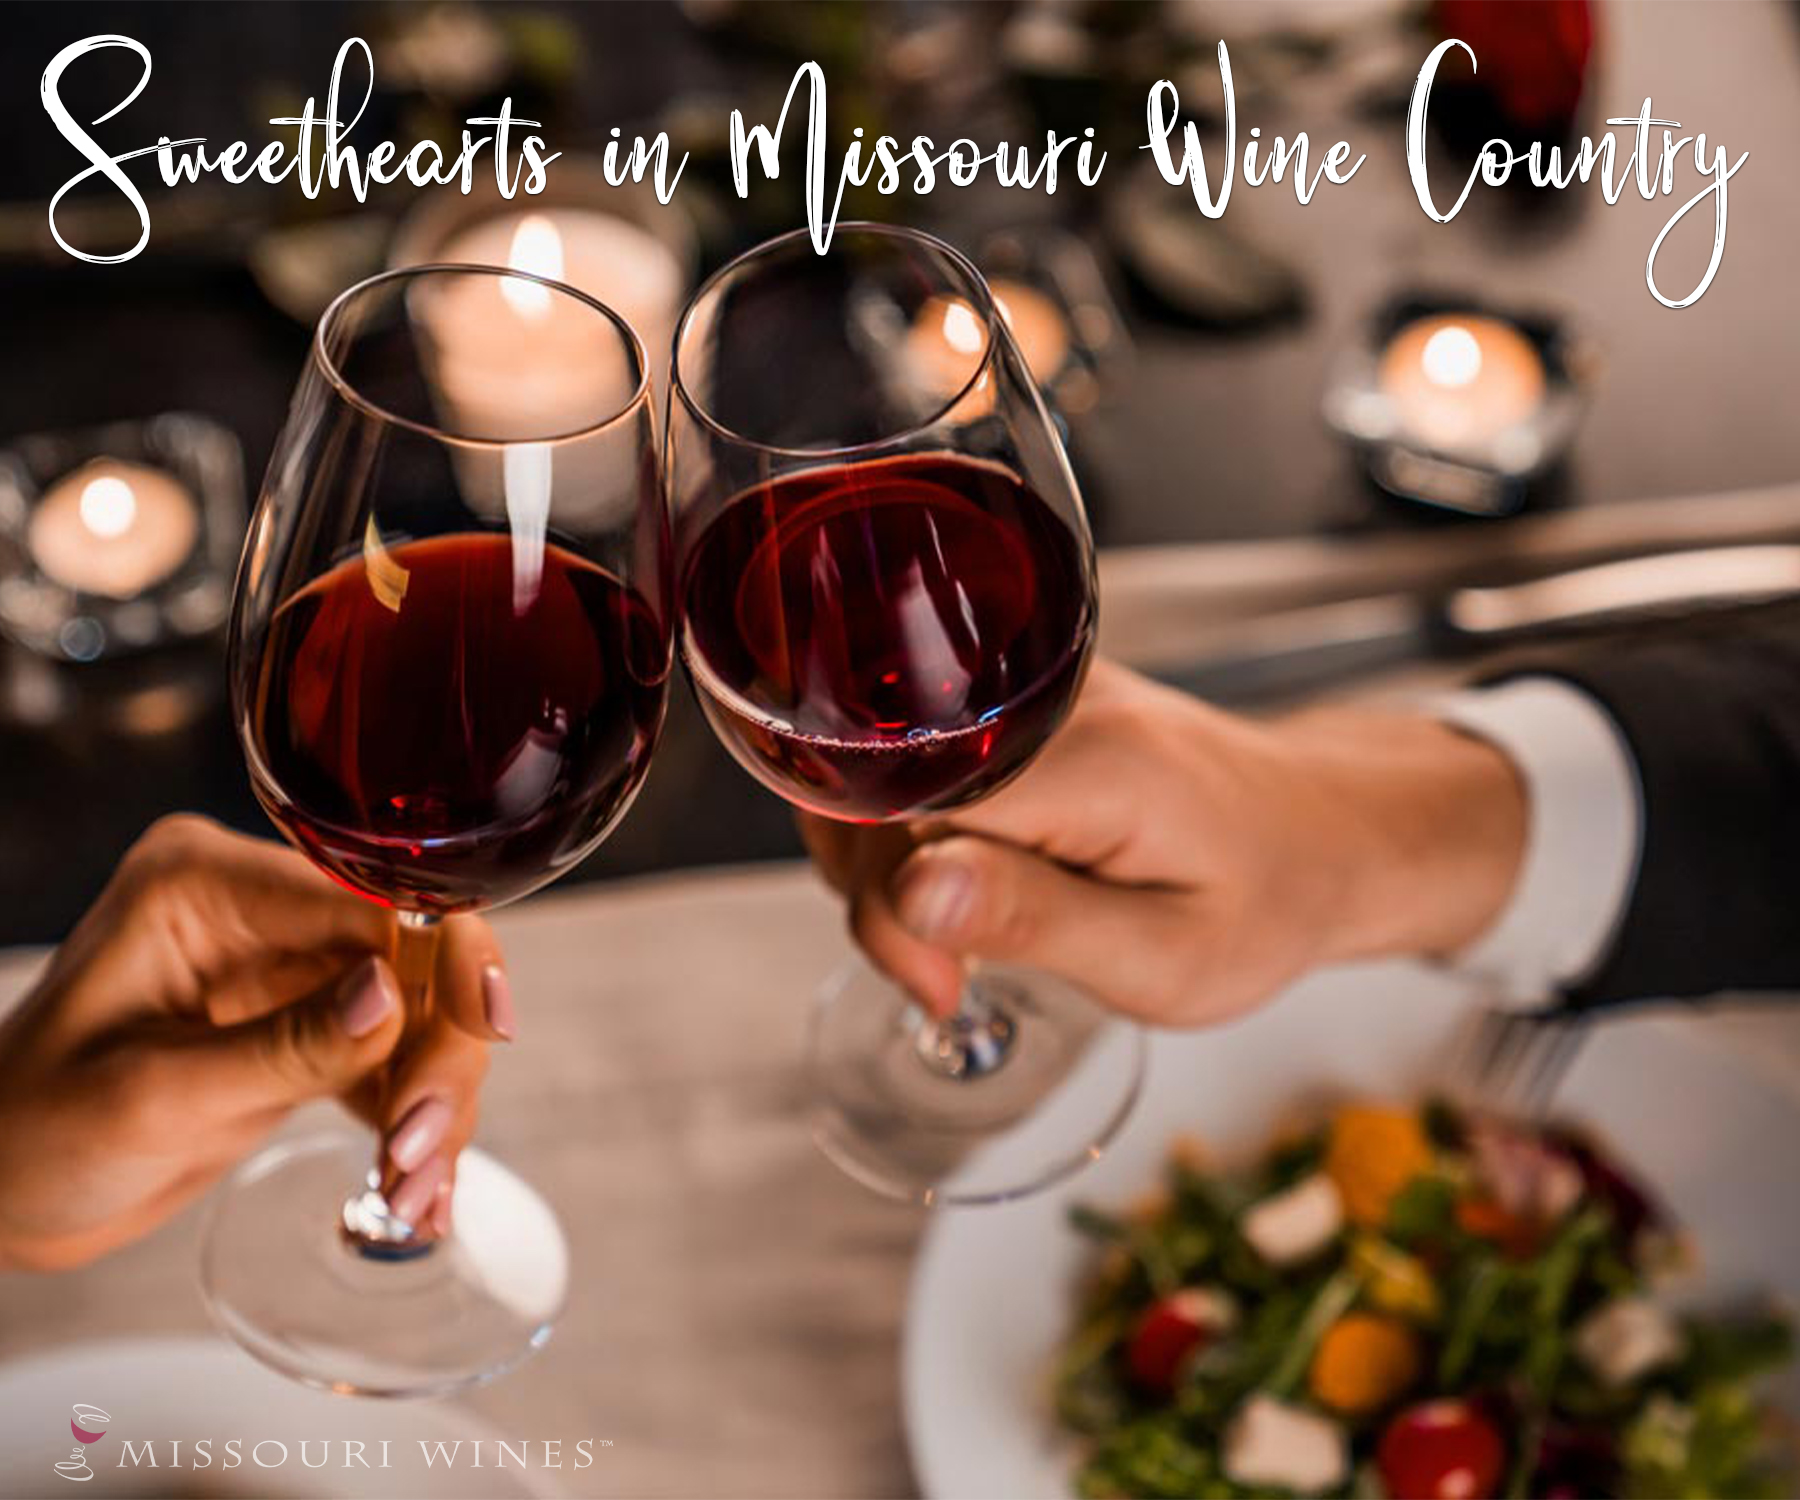 Sweethearts in Missouri Wine Country: Valentine's Day Events